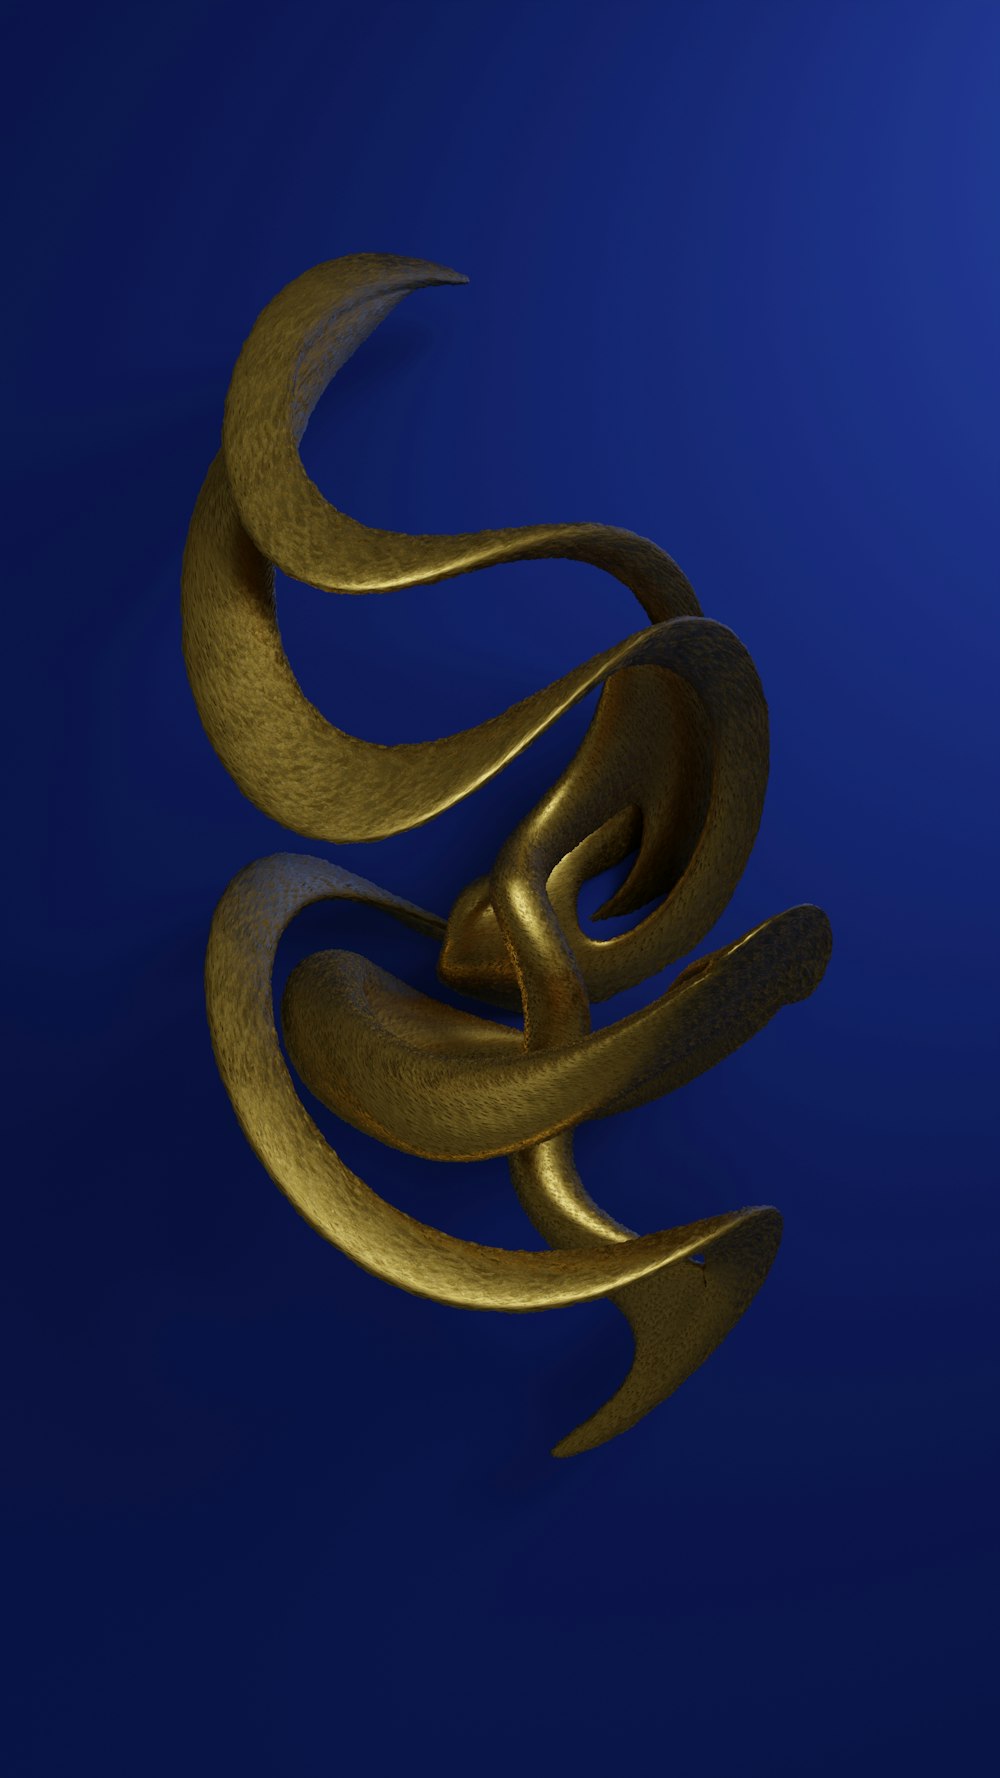 a gold object is shown against a blue background